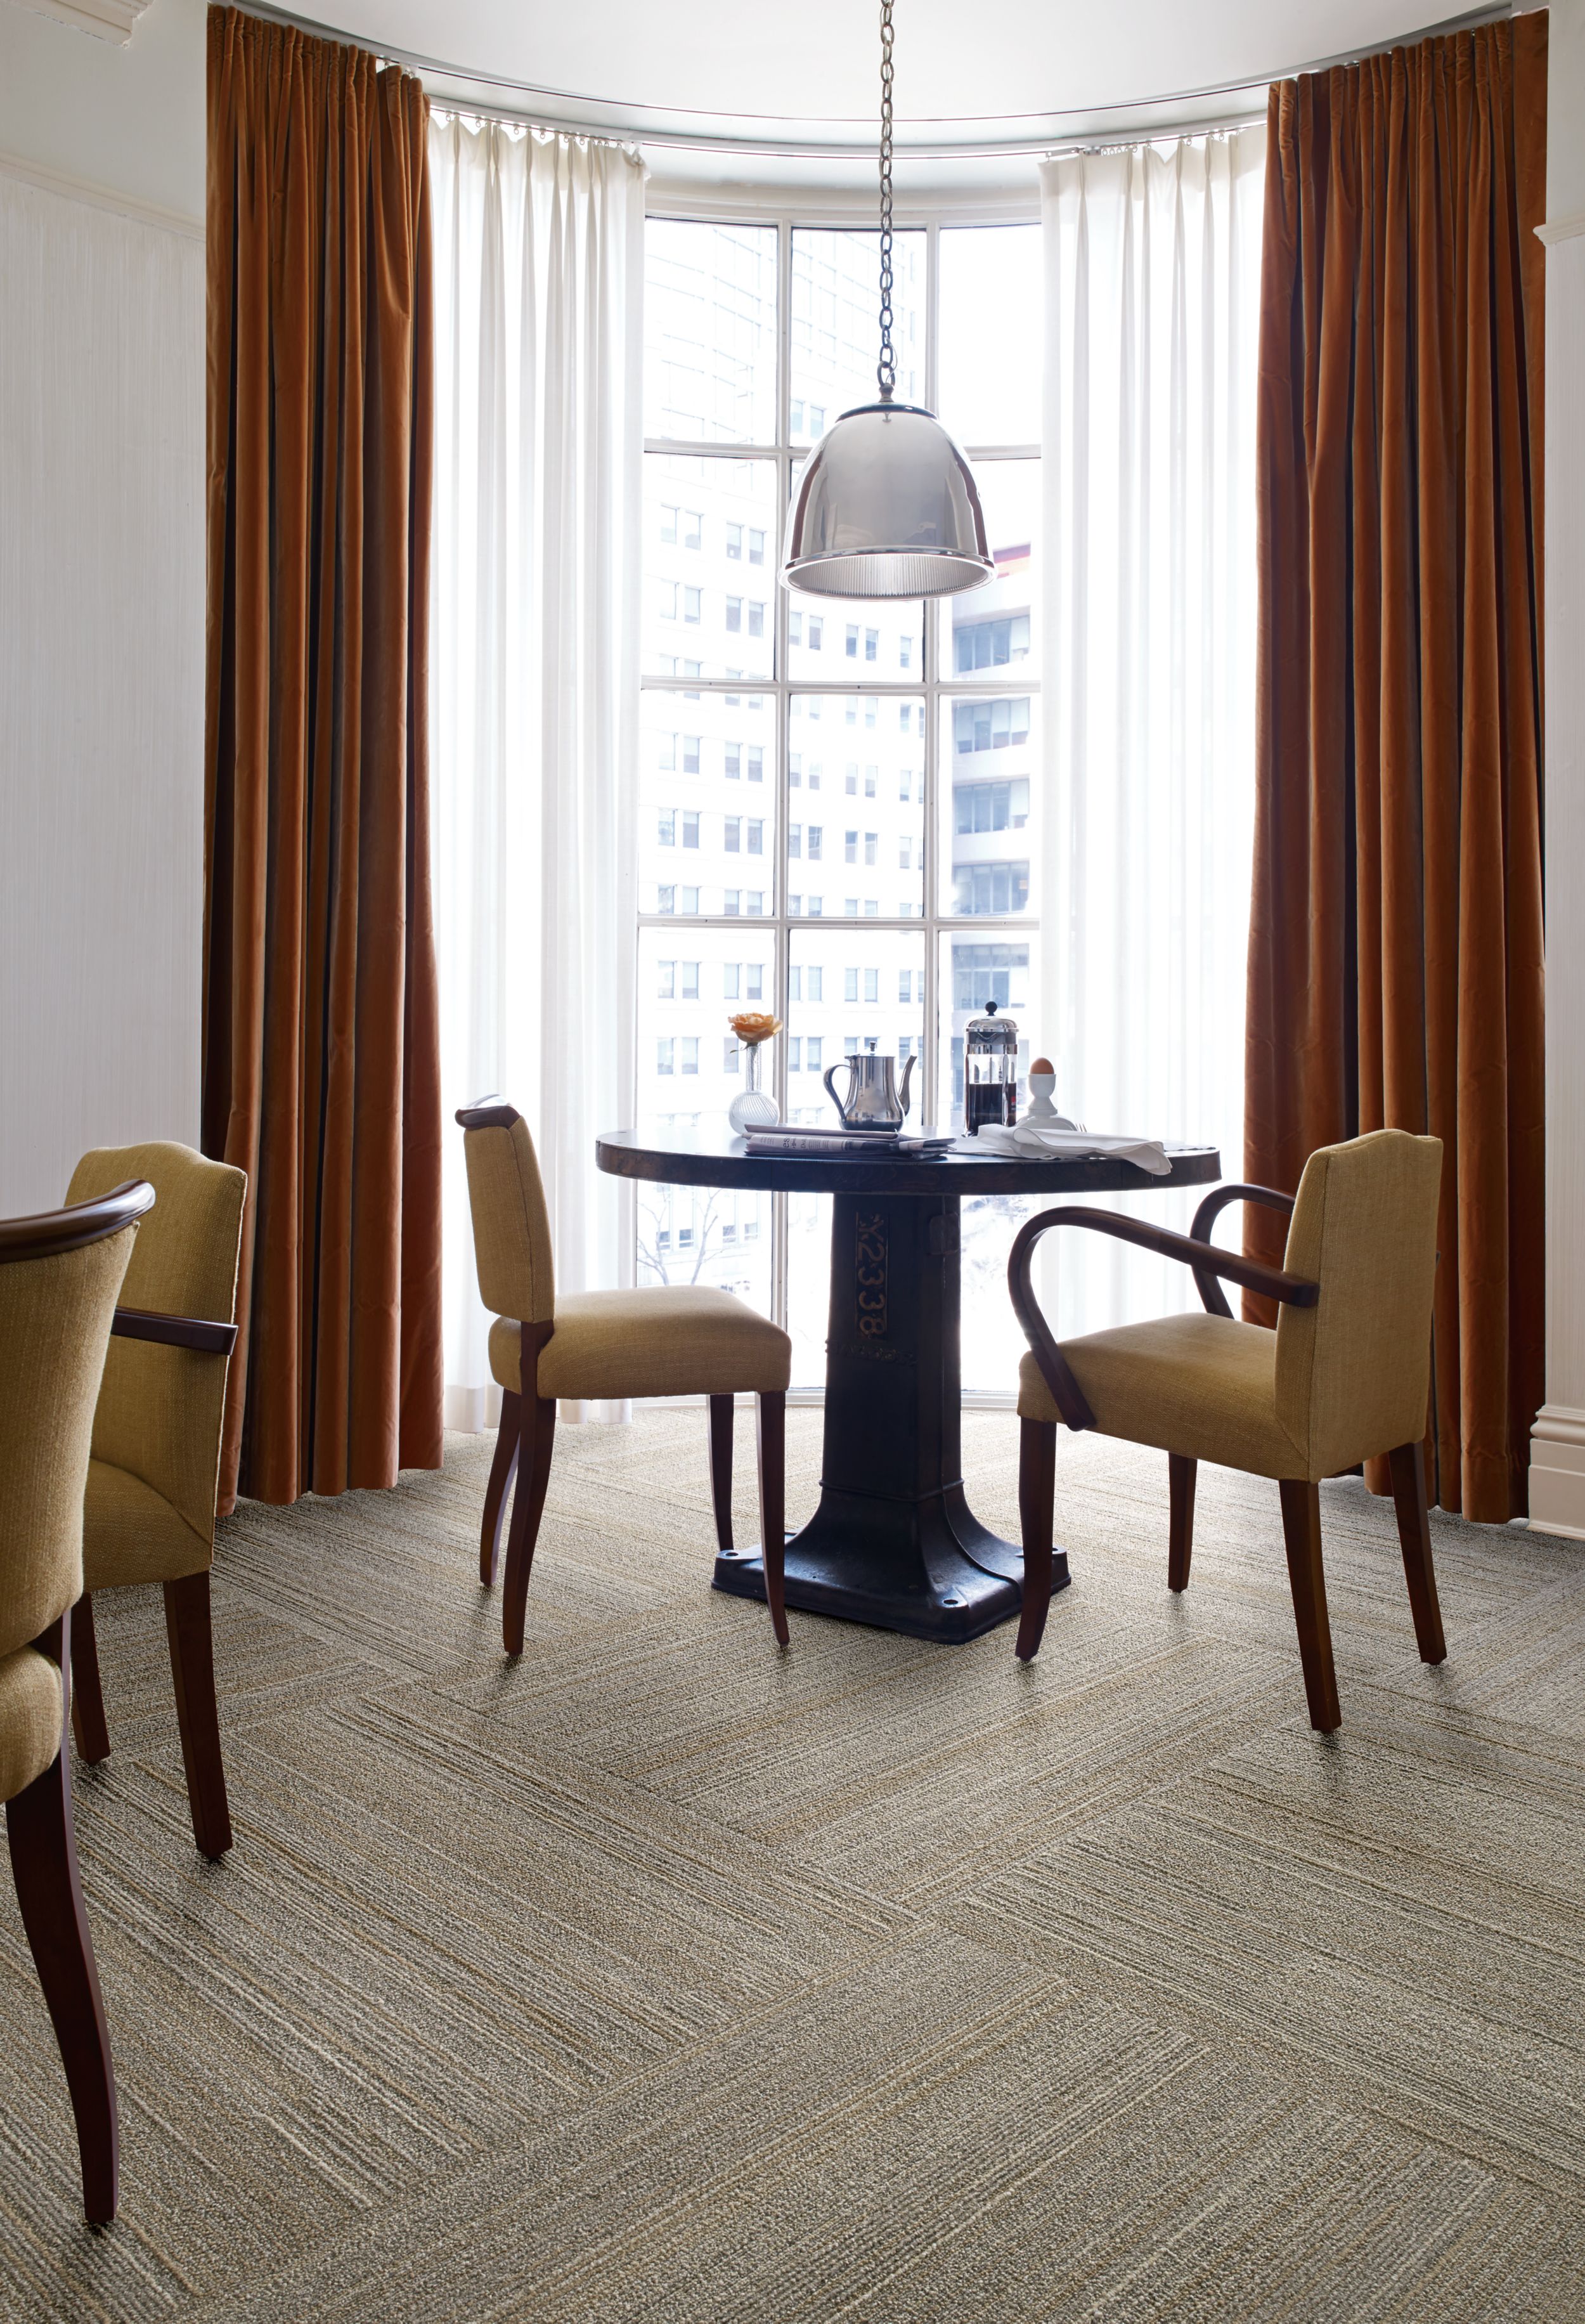 Interface NF400 plank carpet tile at small breakfast table in front of window imagen número 3